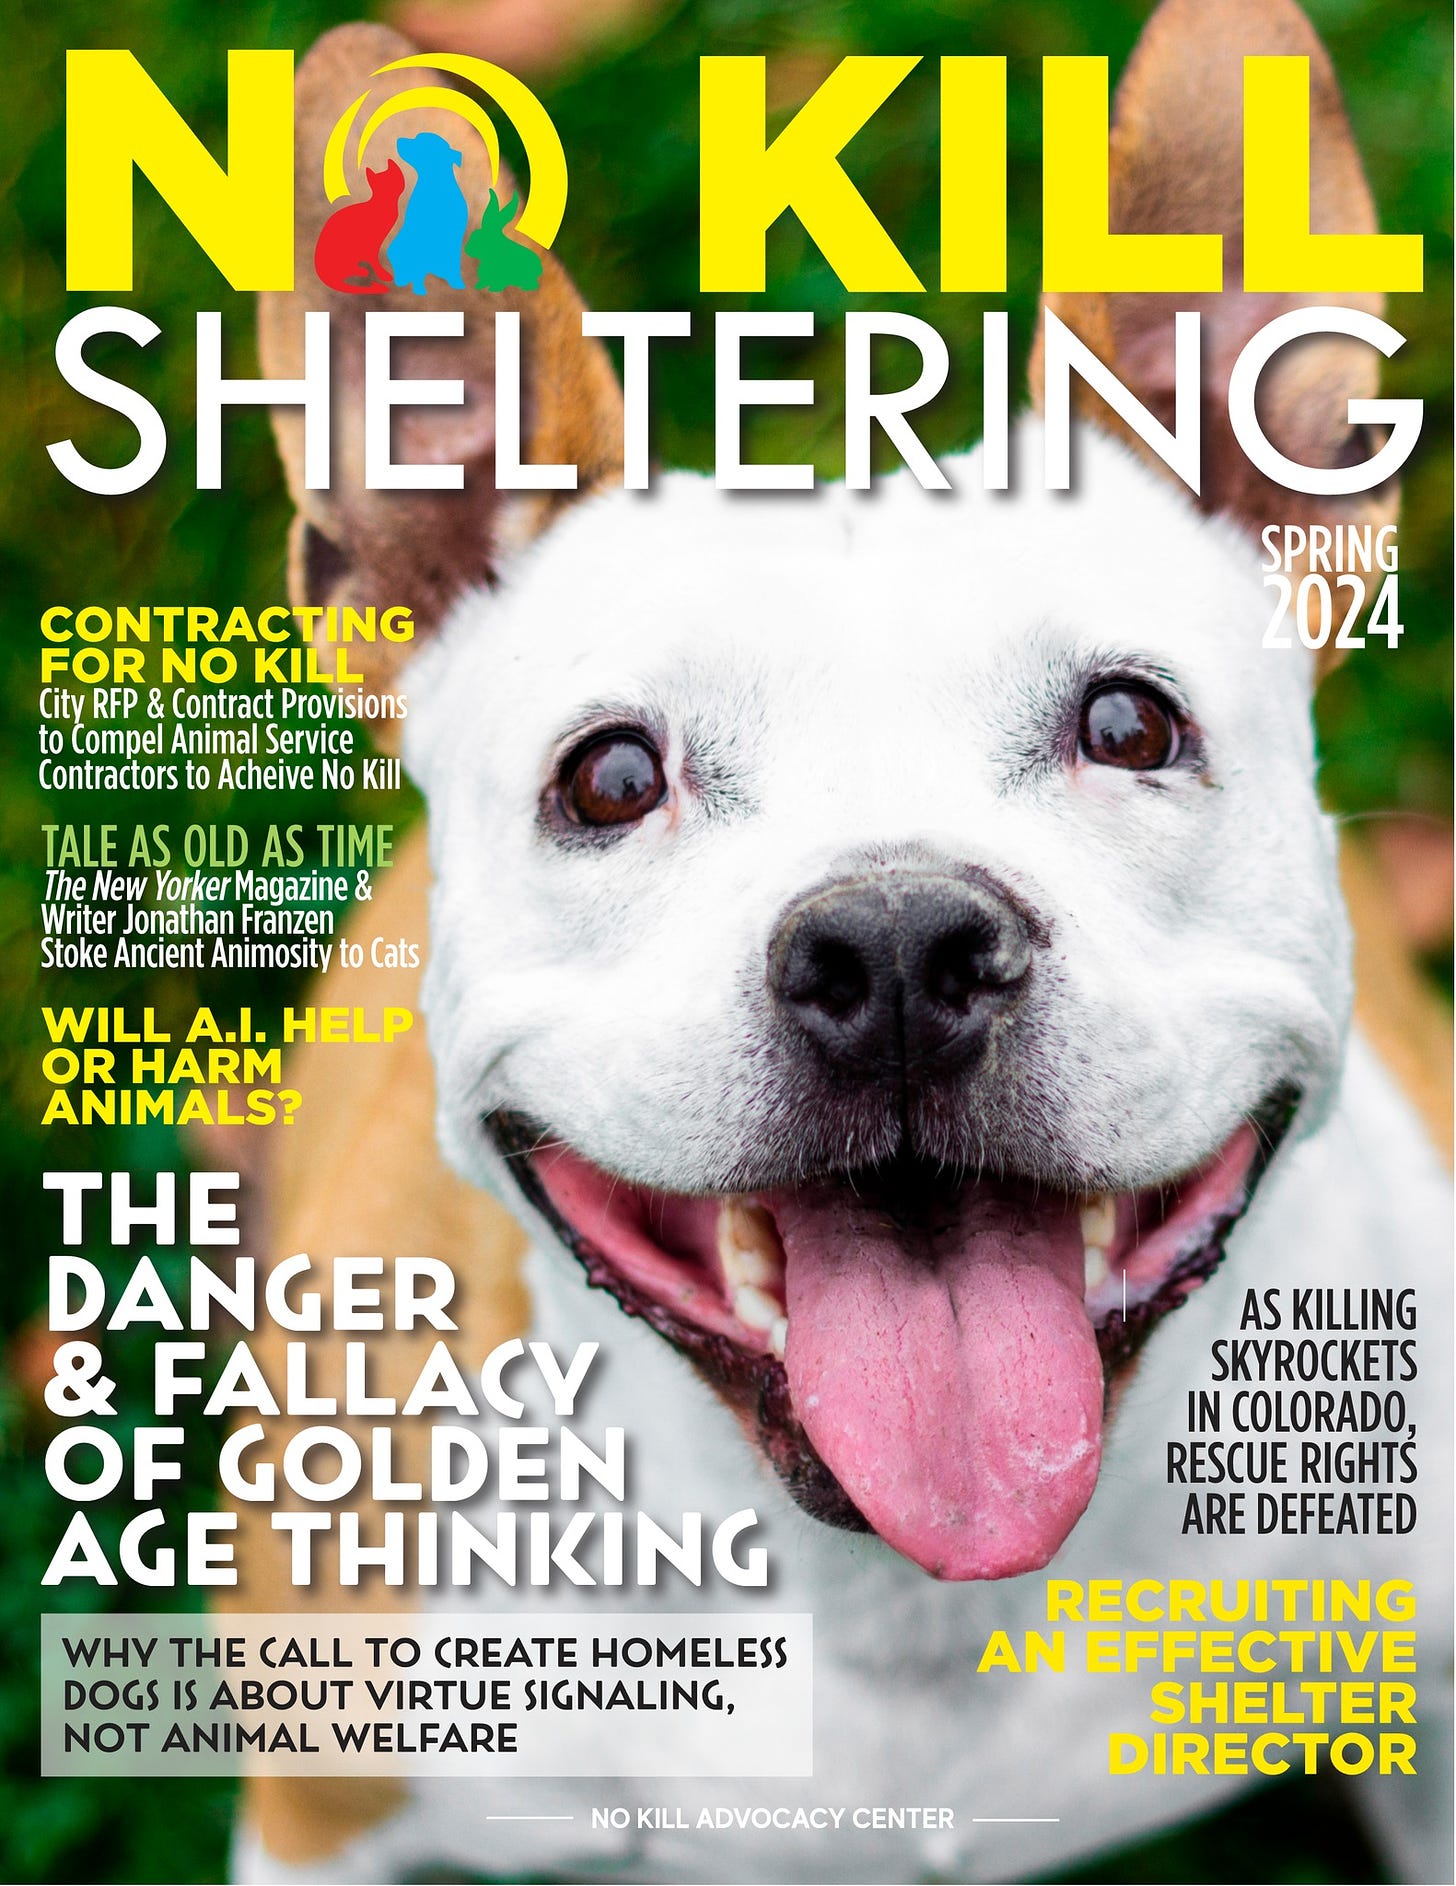 May be an image of dog and text that says 'NO KILL SHELTERING SPRING 2024 CONTRACTING NO KILL City RFP Contract Provisions to Compel Animal Service Contractors Acheive No Kill TALE AS OLD AS TIME New Yorker Magazine Jonathan Franzen Stoke Ancient Animosity to Cats WILL A.I. HELP OR HARM ANIMALS? THE DANGER & FALLACY OF GOLDEN AGE THINKING WHV THE CALL TO CREATE HOMELESS DOGS ABOUT VIRTUE SIGNALING, NOT ANIMAL WELFARE AS KILLING SKYROCKETS IN COLORADO, RESCUE RIGHTŚ ARE DEFEATED RECRUITING AN EFFECTIVE SHELTER DIRECTOR KILLADVOCACY CENTER'